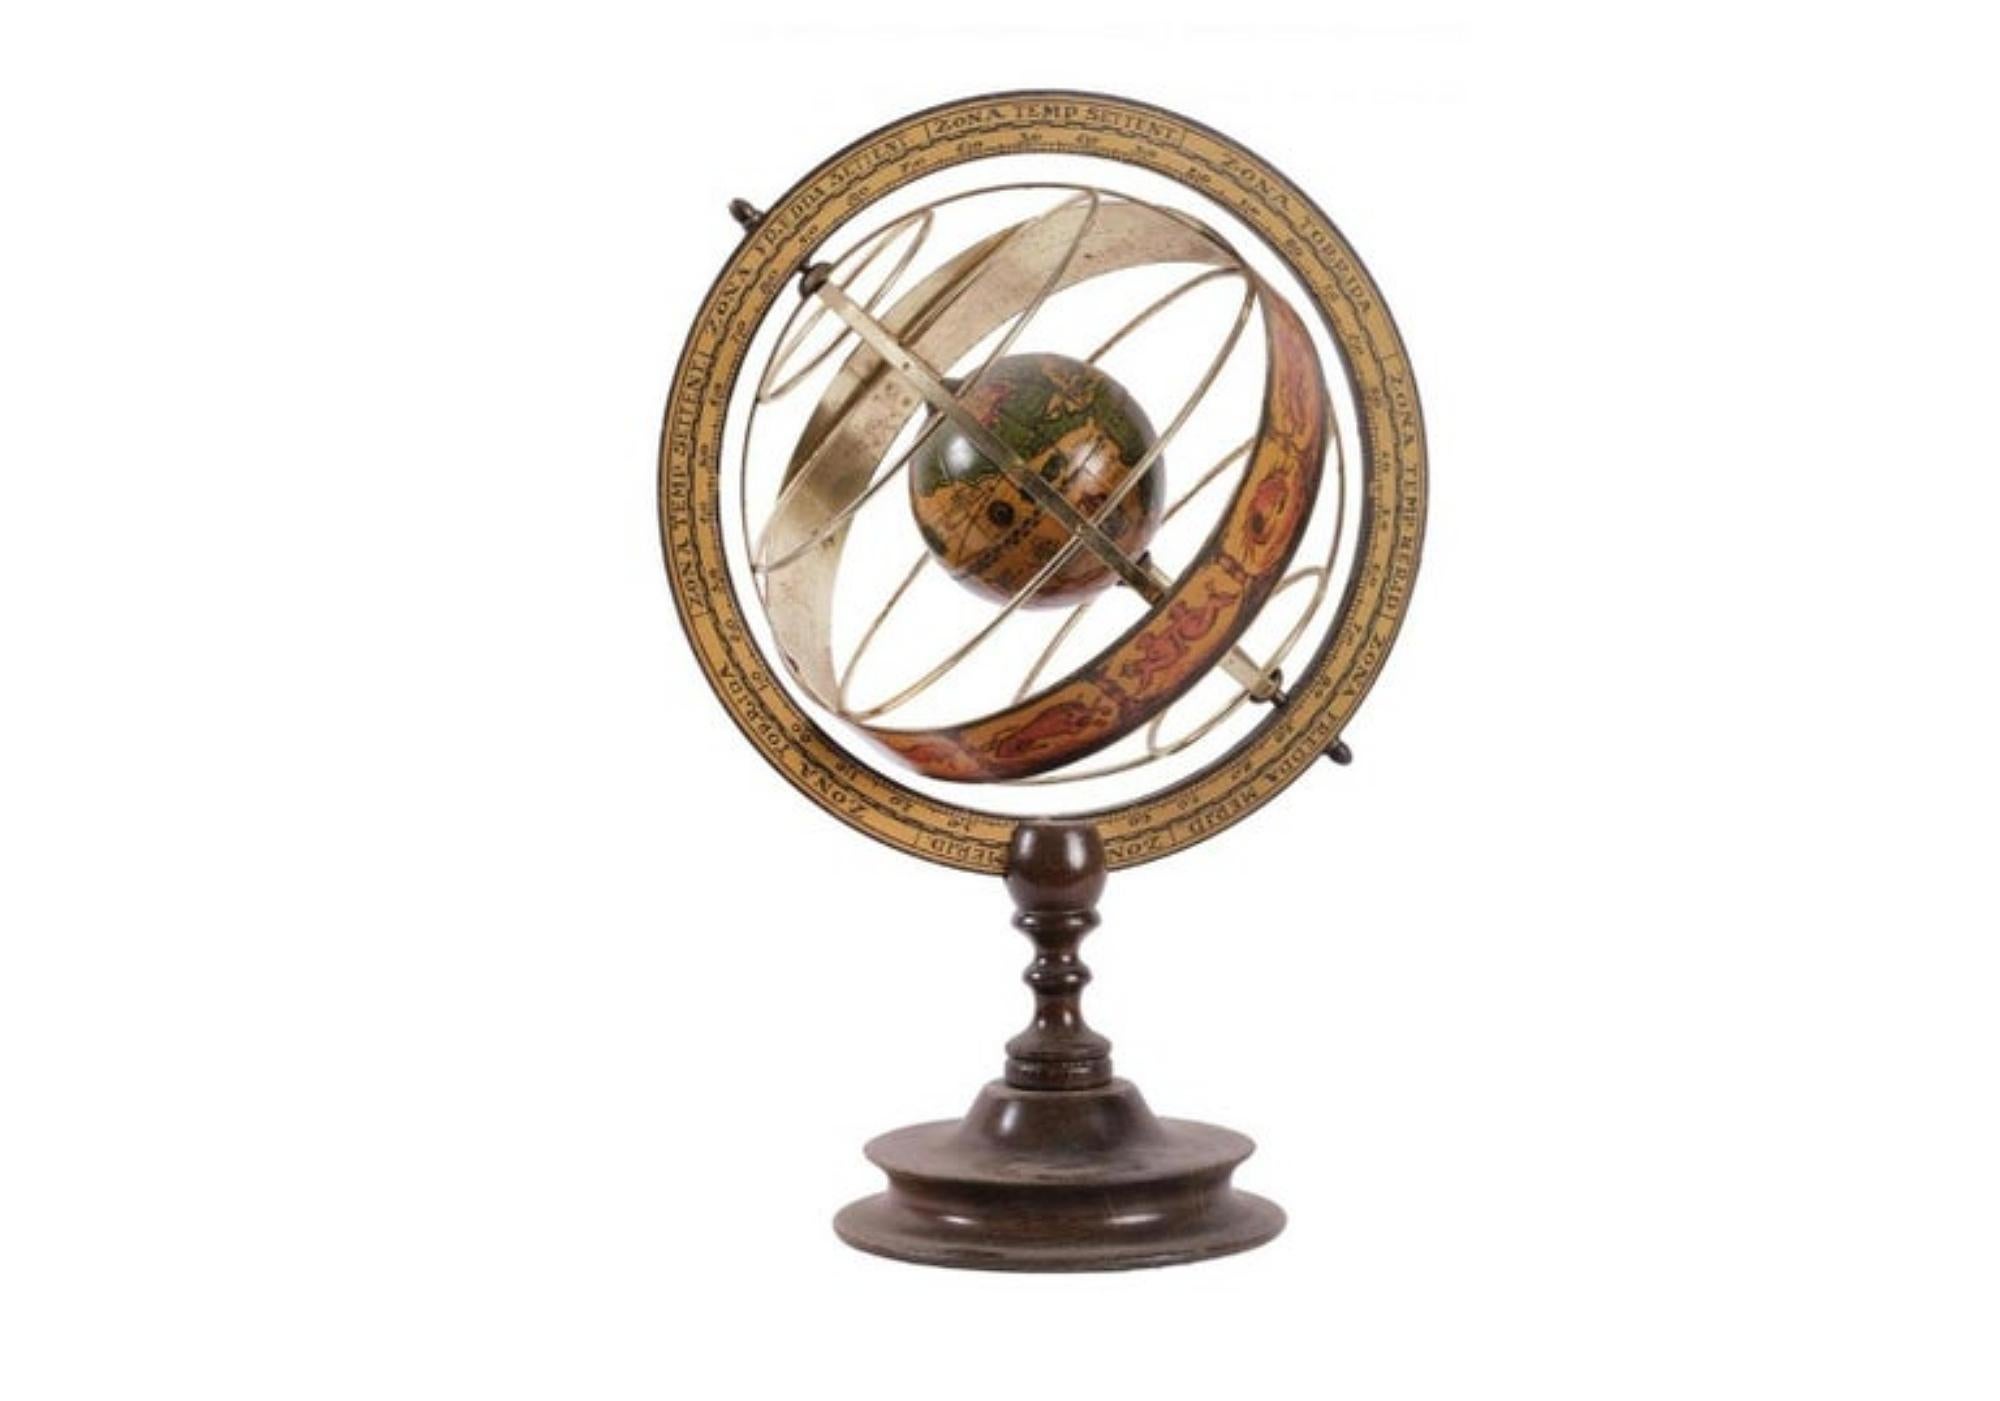 Italian metal armillary sphere with wooden base early 20th century.
Dimensions
37 x 26 x 26 cm
Very good condition.